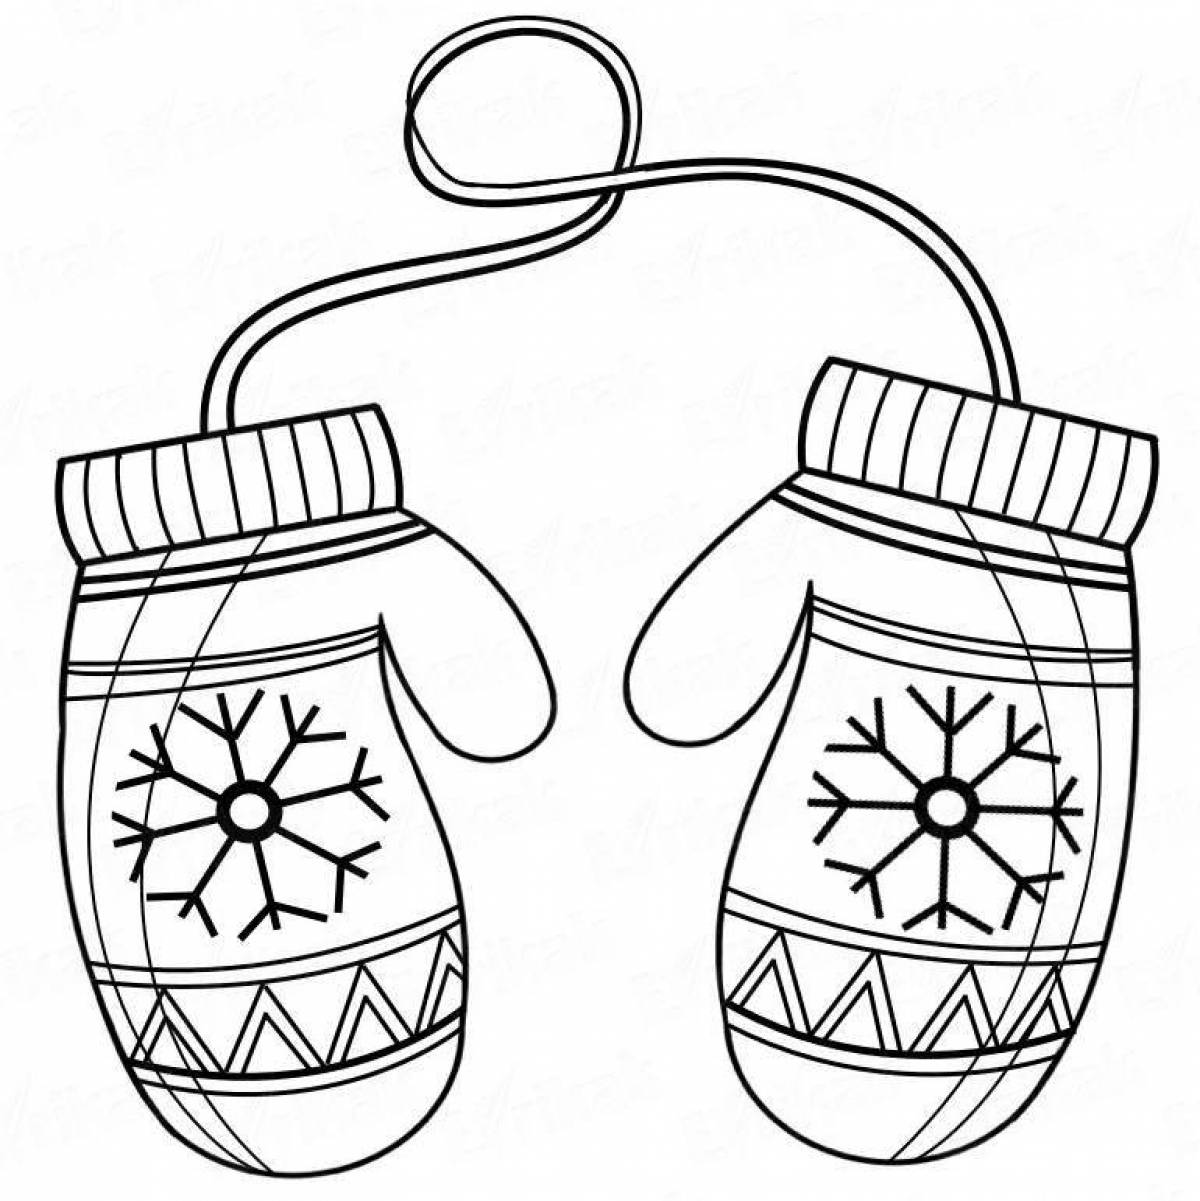 Coloring book bold mitten